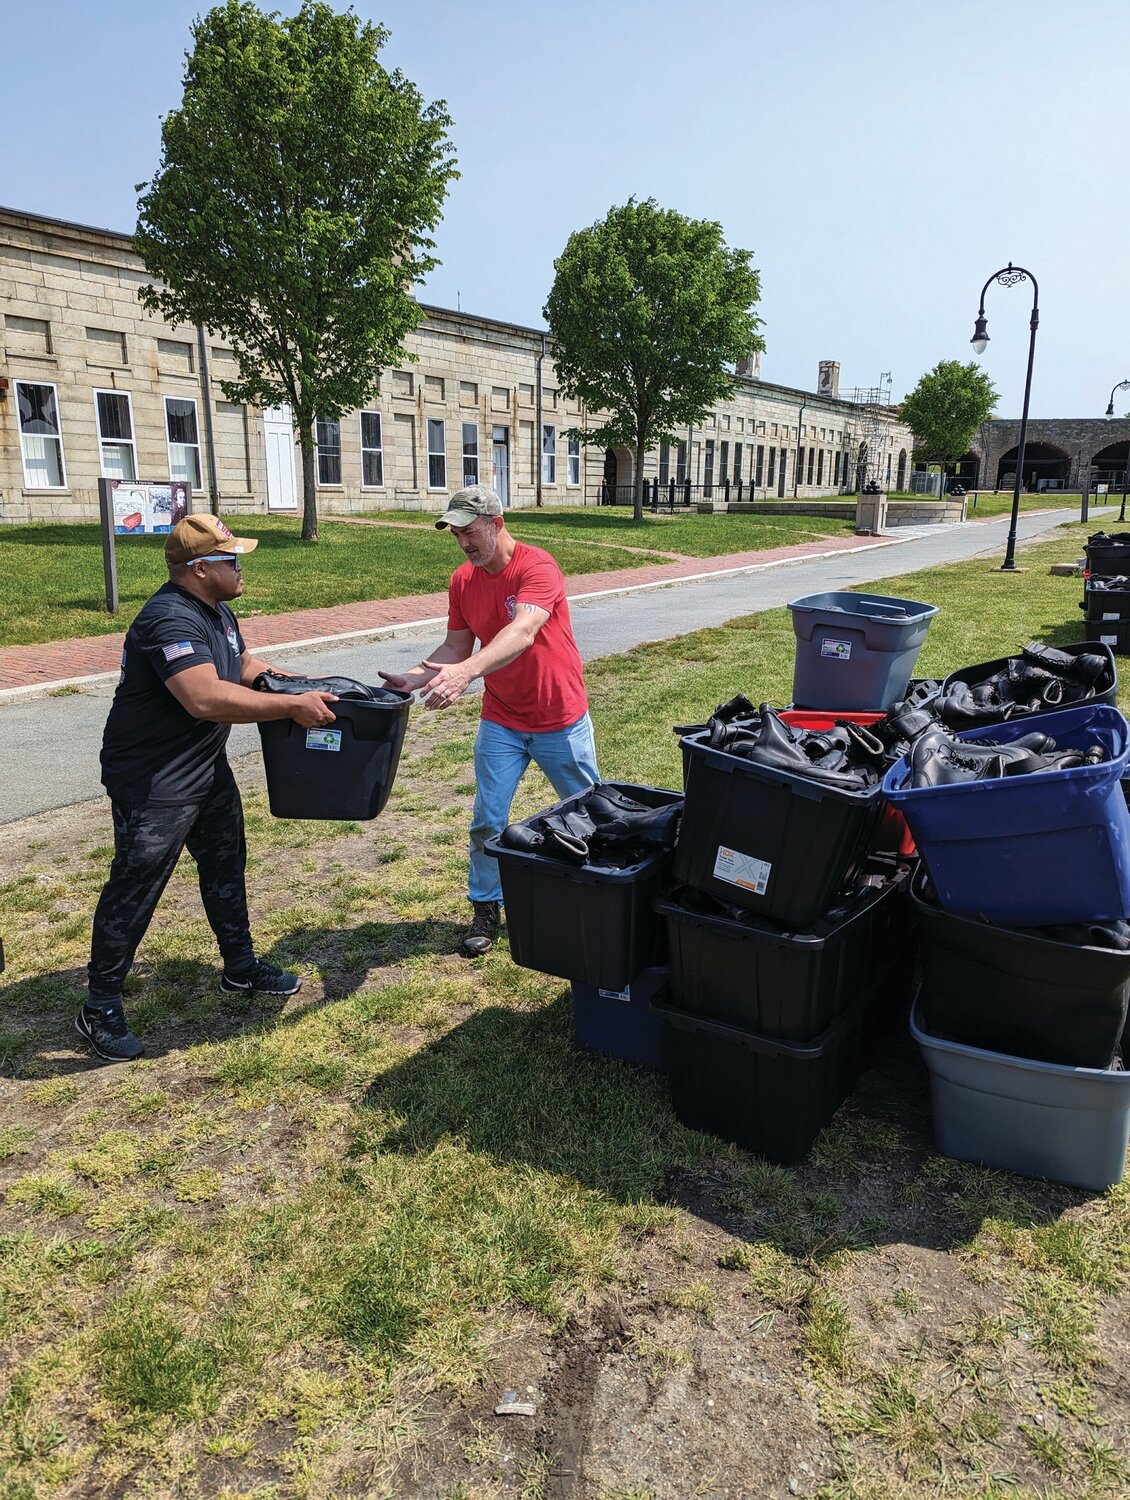 SET UP BEGINS: Dispersing the boots, Santos Perez (left) and George Luttge (right), spent Monday working to set up for the Boots on the Ground event.